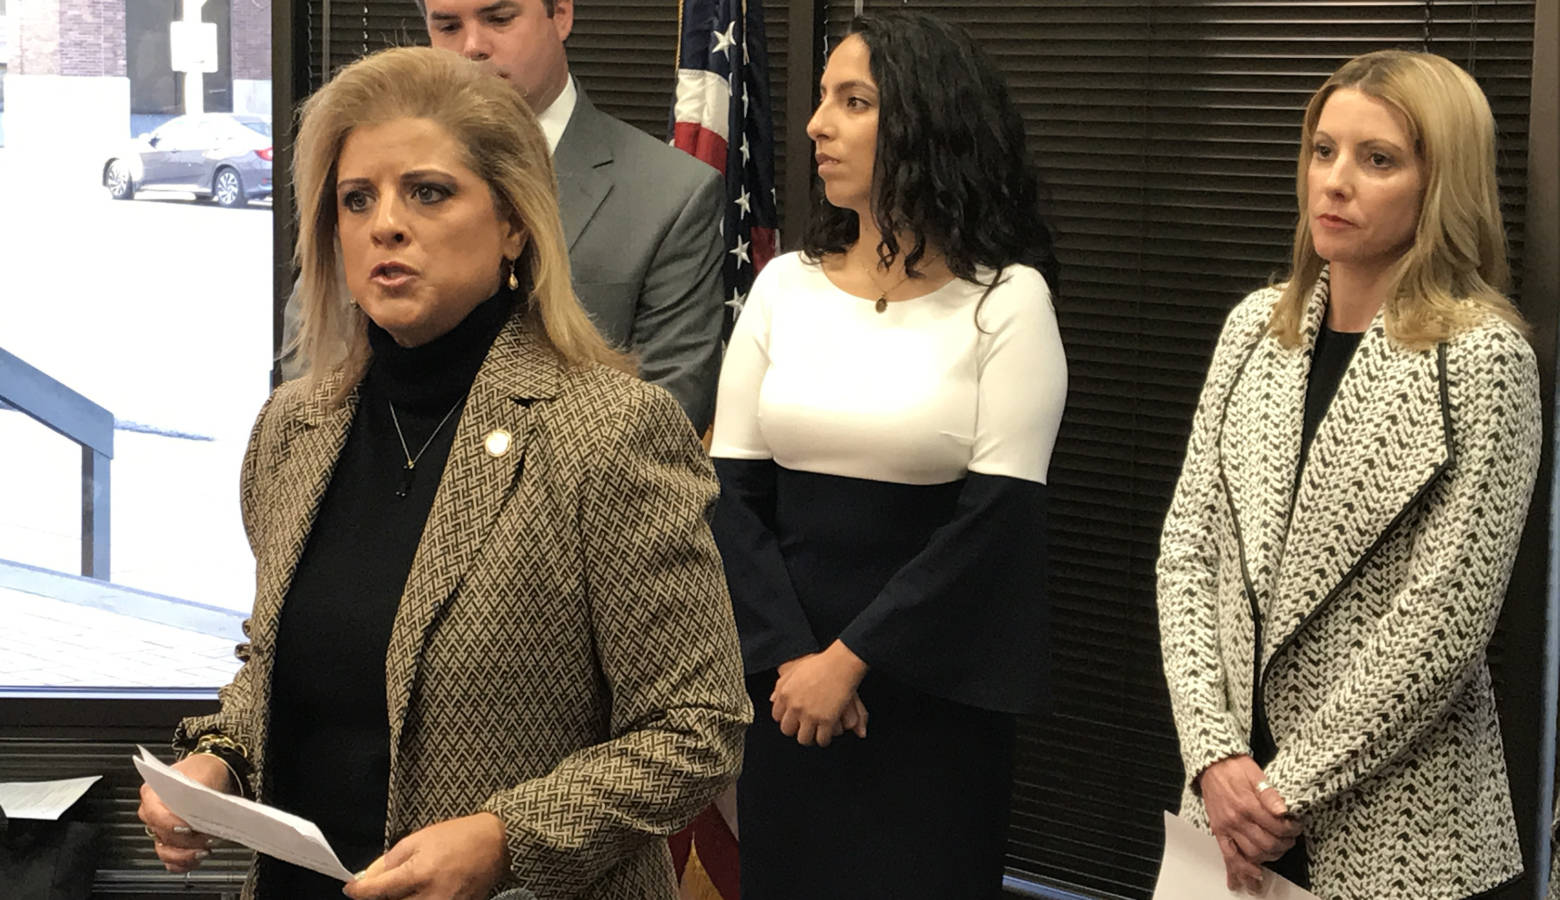 Rep. Mara Candelaria Reardon (D-Munster) speaks to reporters in October after a special prosecutor declined to bring charges against Attorney General Curtis Hill. (Brandon Smith/IPB News)